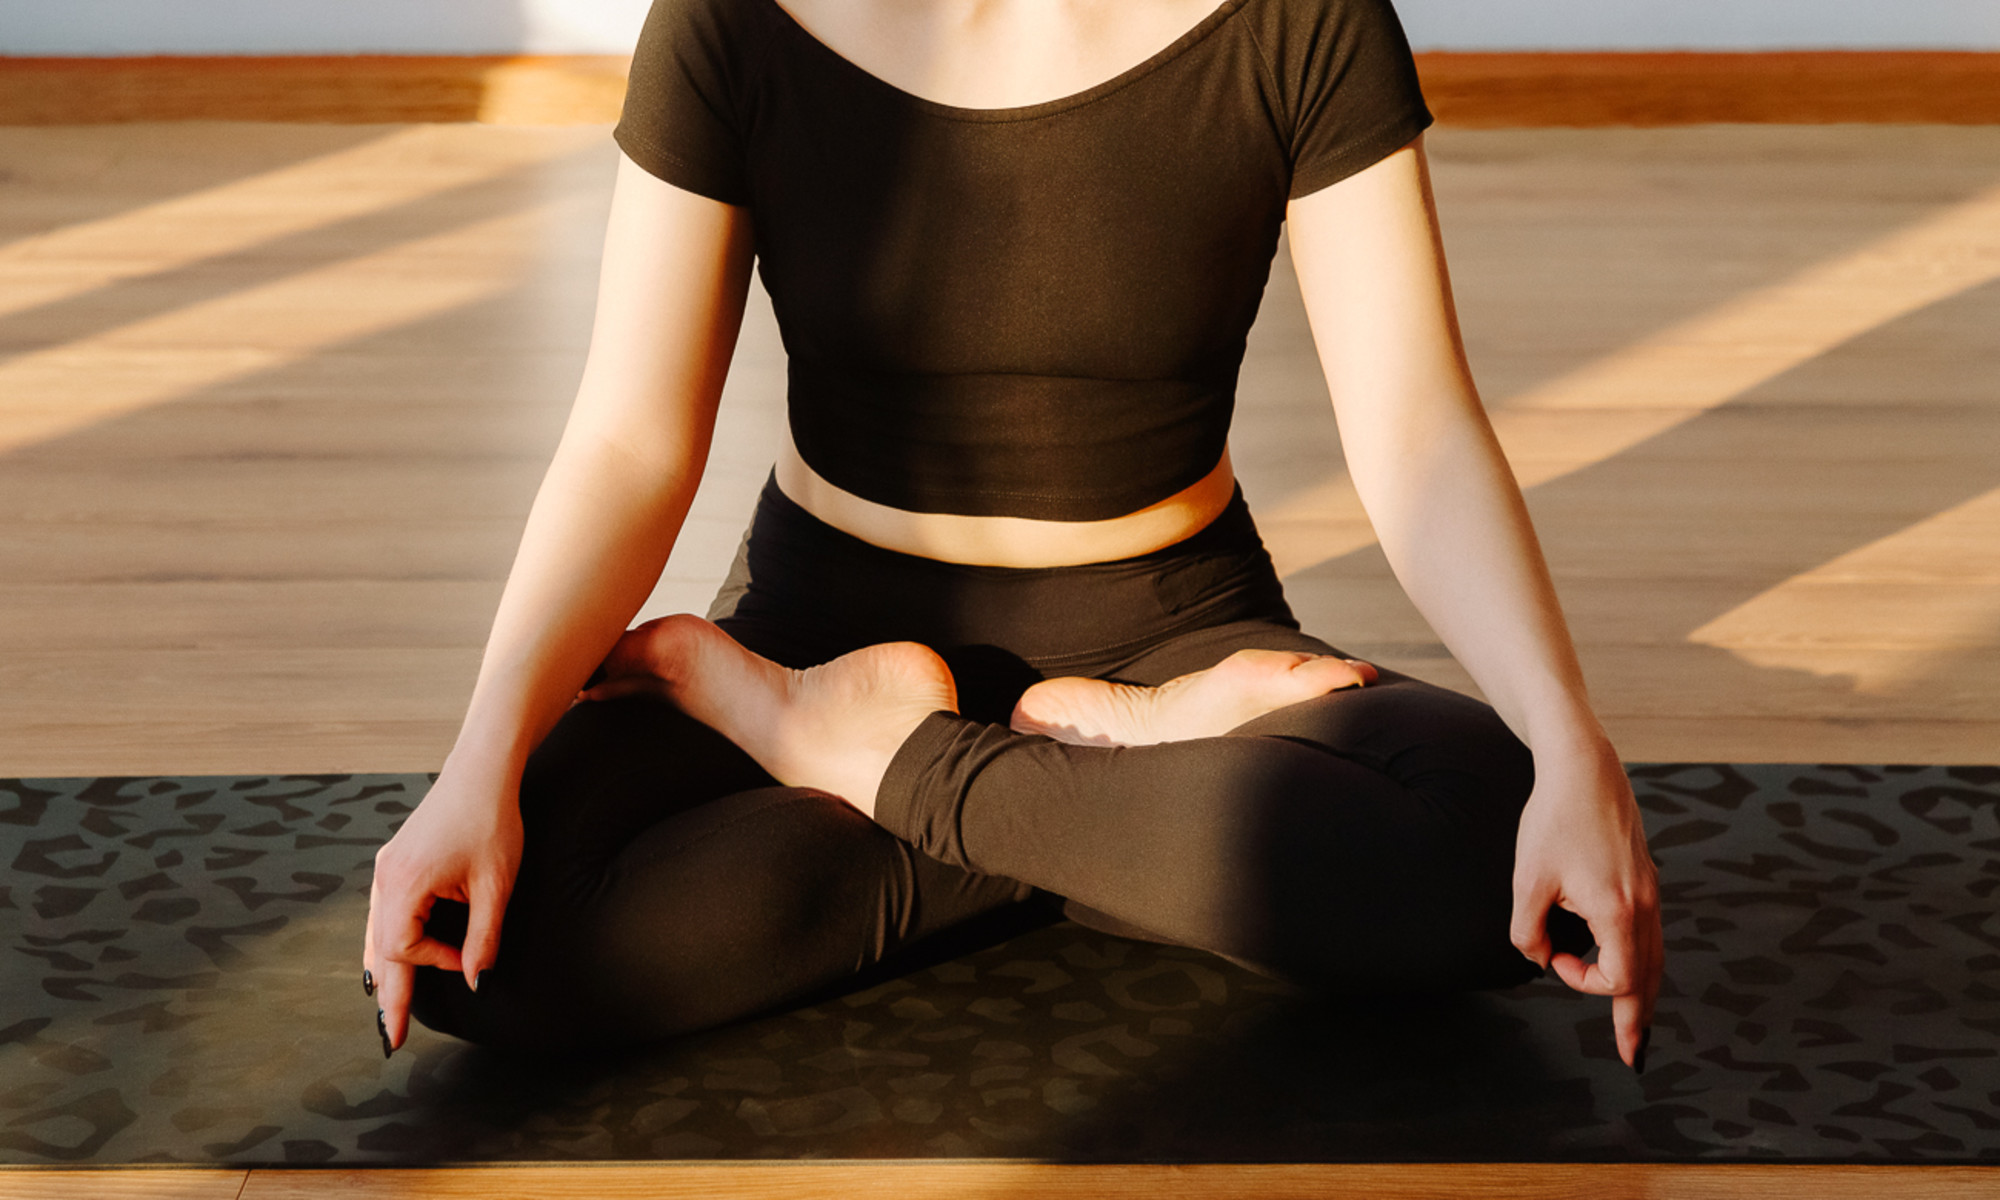 What is the right order of practicing Asana, Pranayama, and Meditation,  What should be performed first?